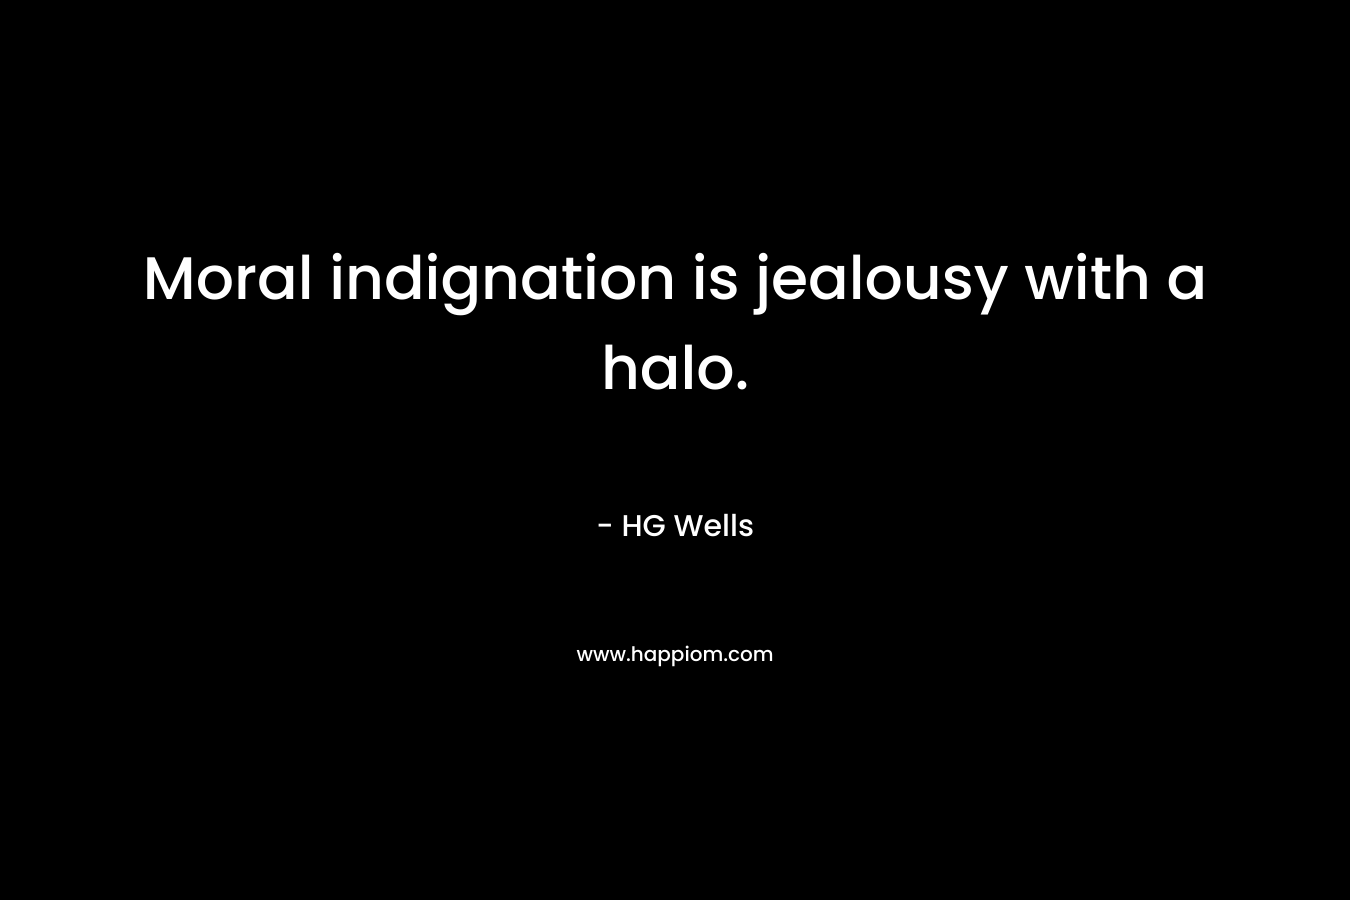 Moral indignation is jealousy with a halo. – HG Wells